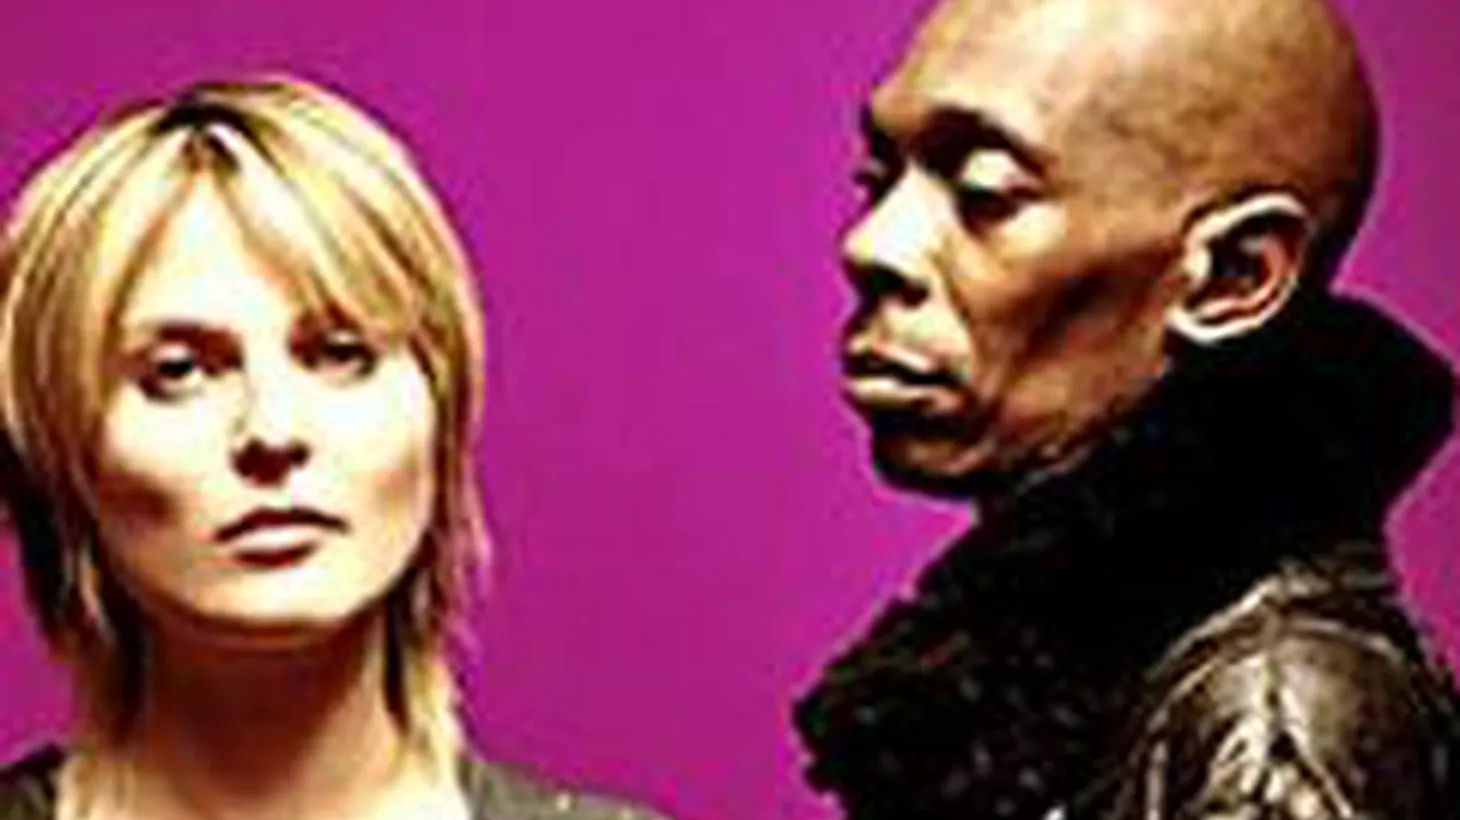 House and pop outfit Faithless take an acoustic approach to their songs on Morning Becomes Eclectic at 11:15am.